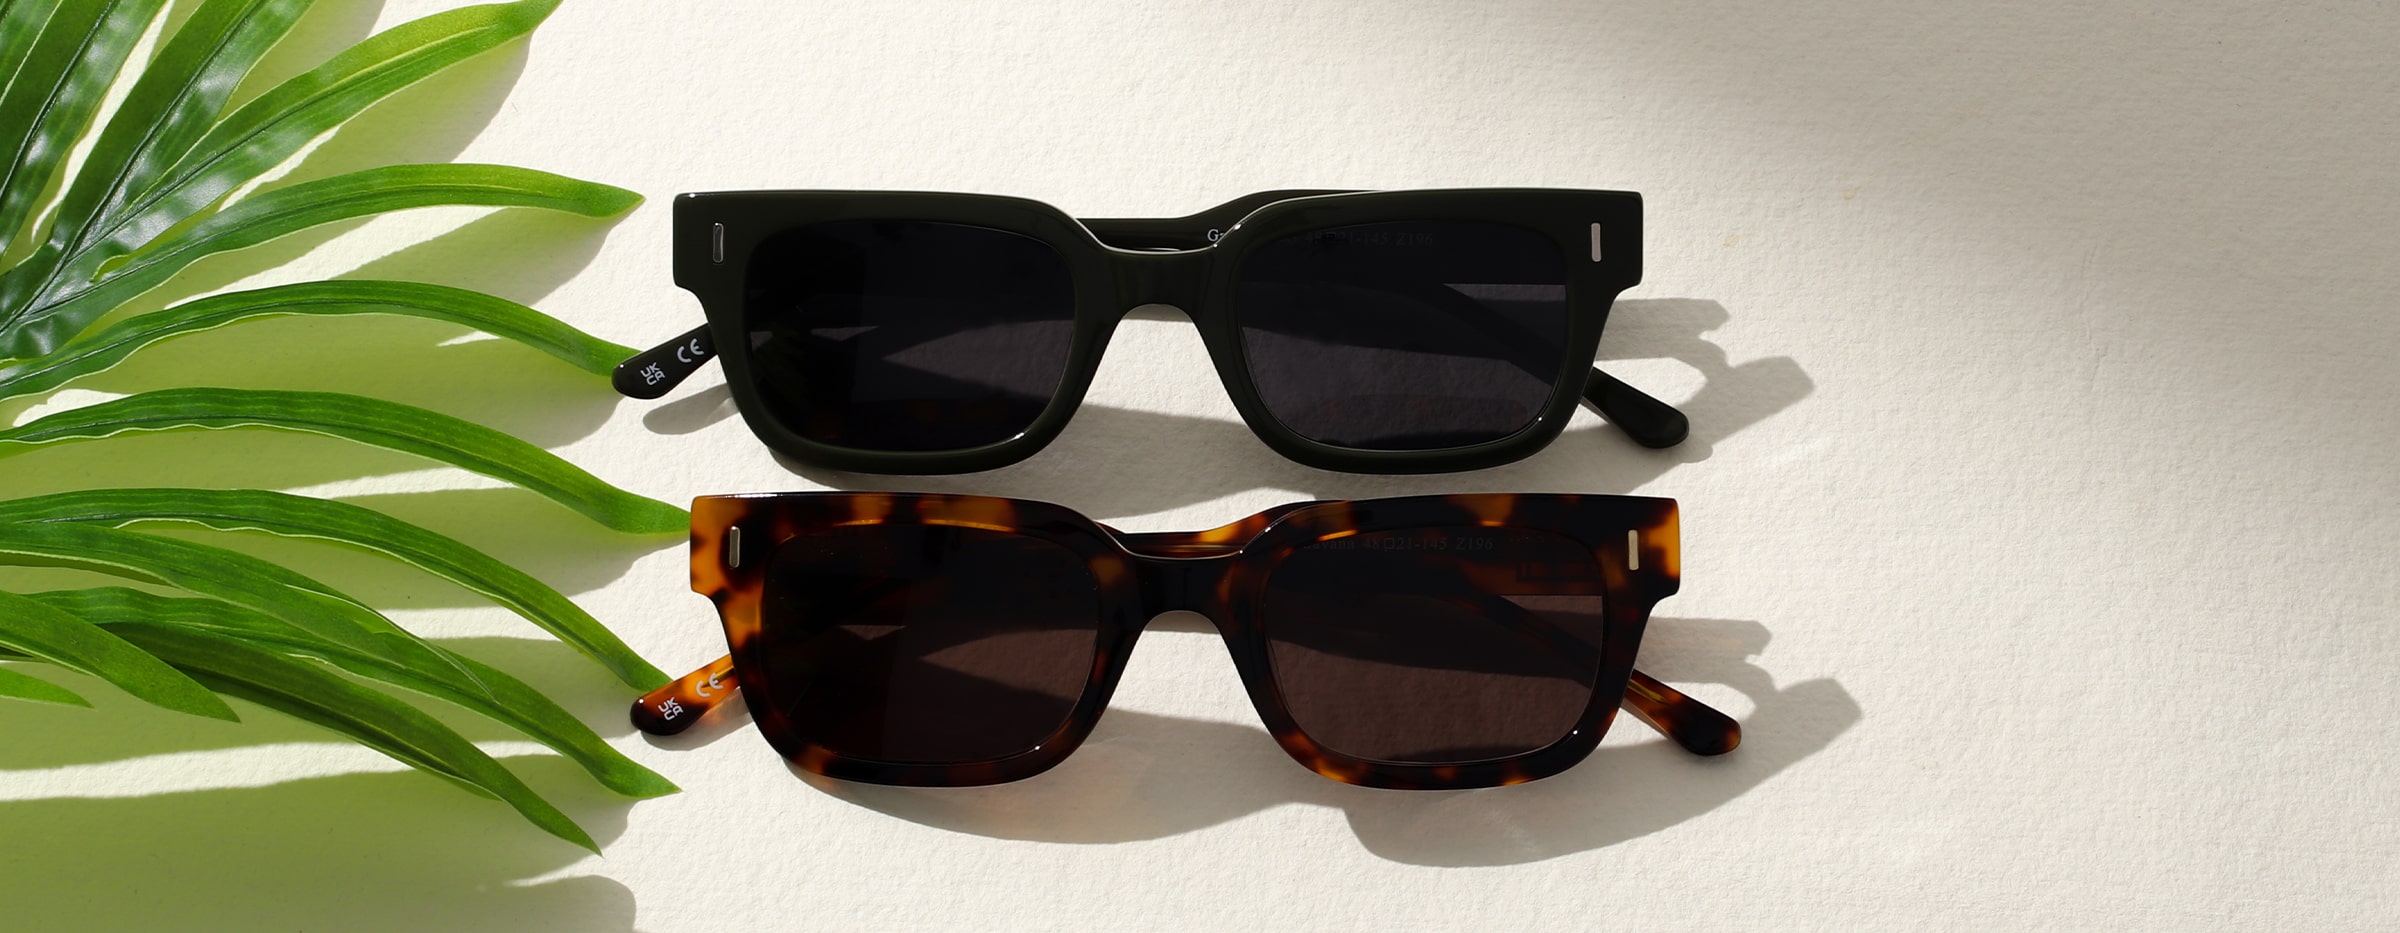 A black and a tortoiseshell pair of sunglasses lying on a table next to a palm frond